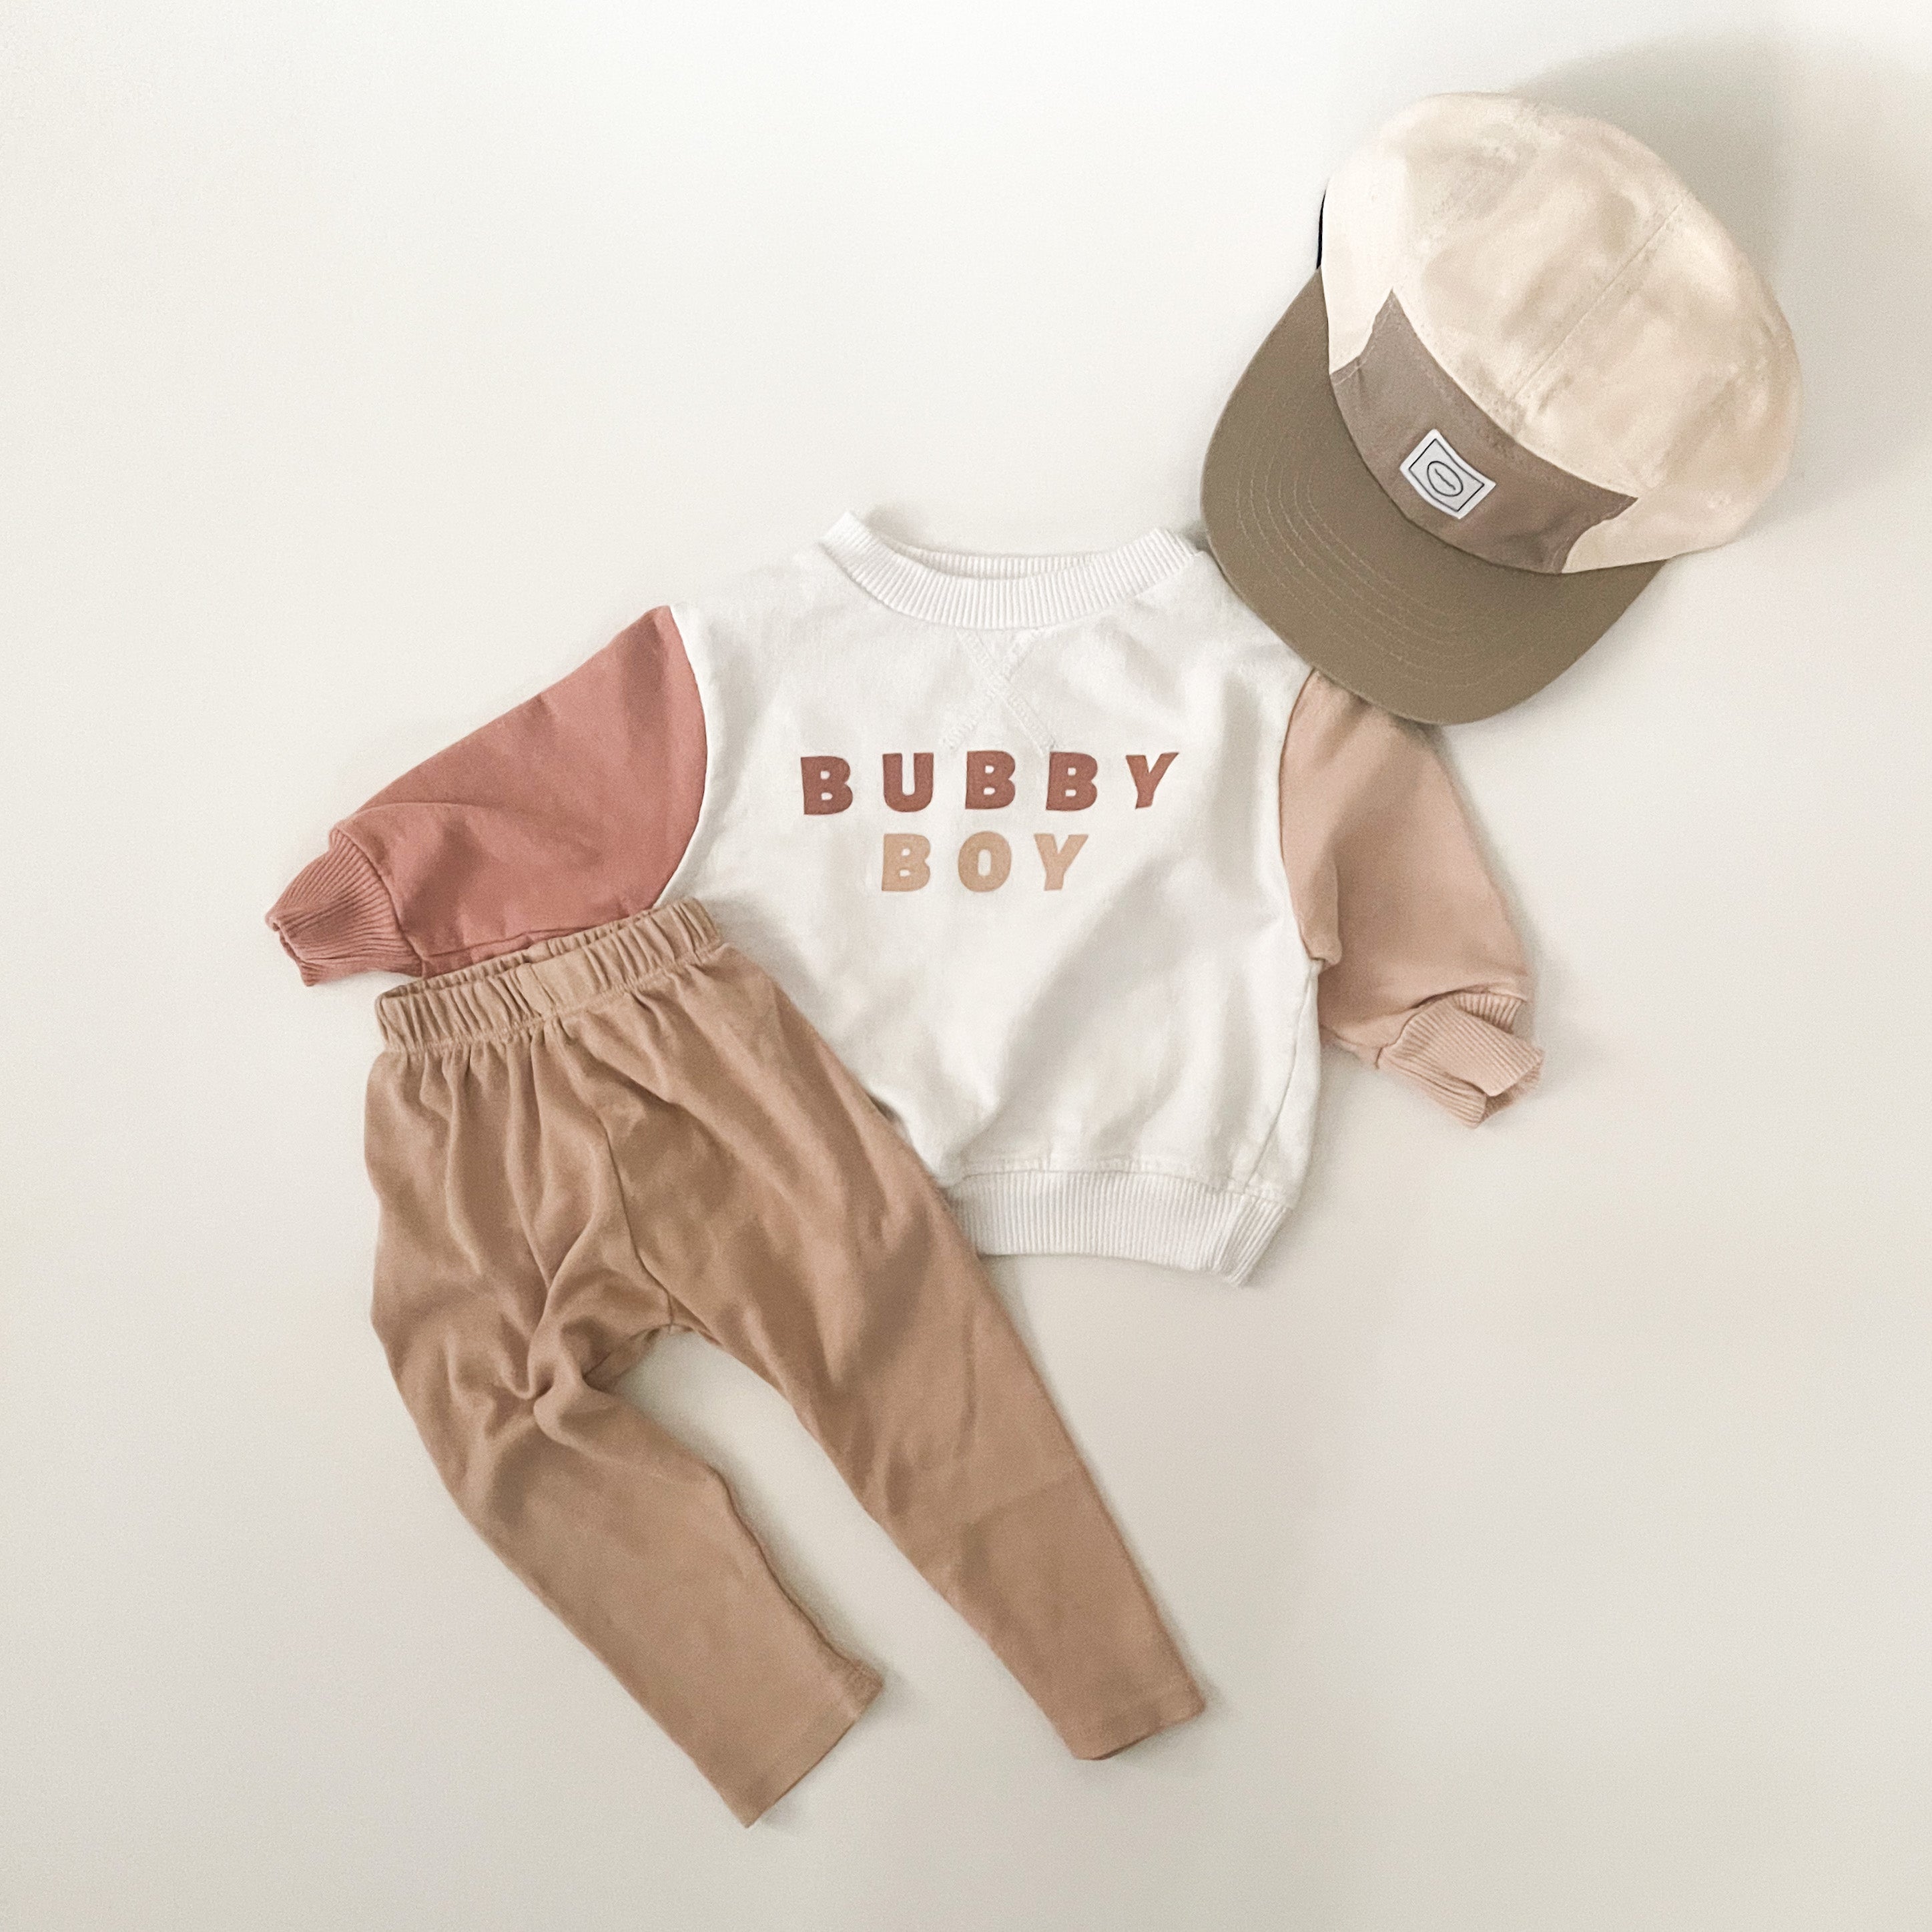 BUBBY BOY Contrast Sleeve Pullover